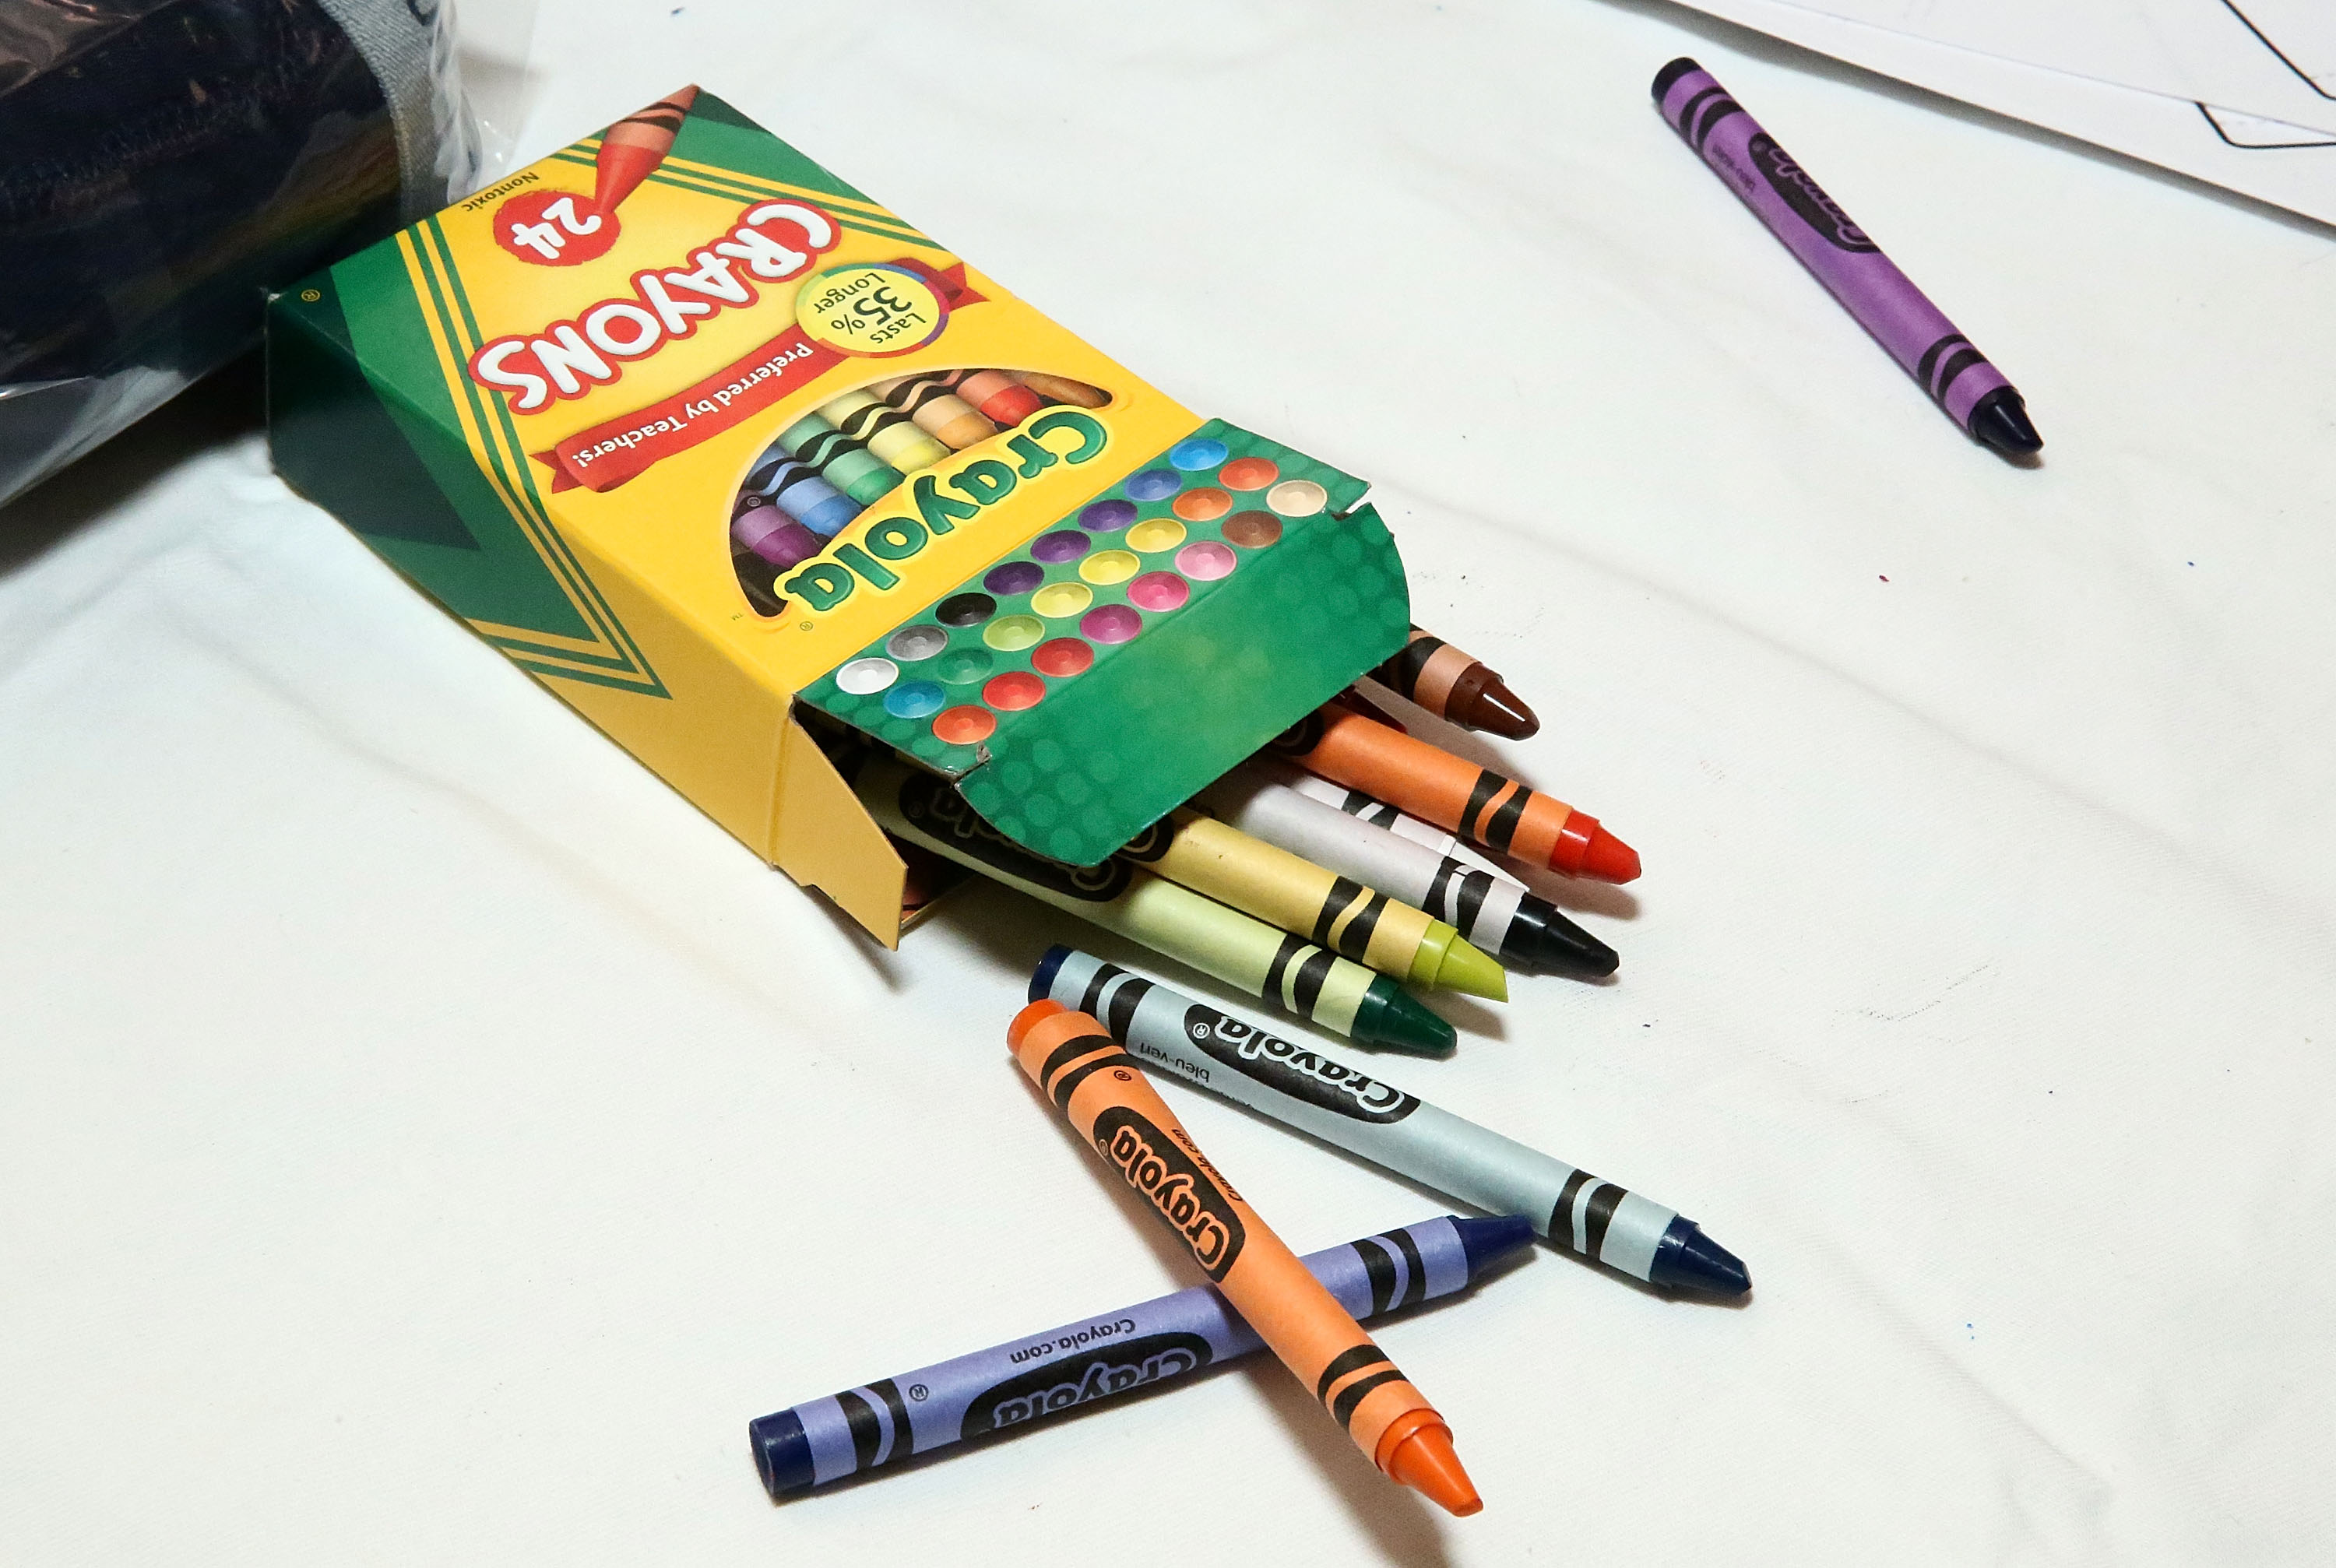 Crayola crayons are displayed at The MOMS &amp; New York Family Magazine Cover Party at 100 Barclay on August 16, 2016 in New York City. (Astrid Stawiarz—Getty Images)